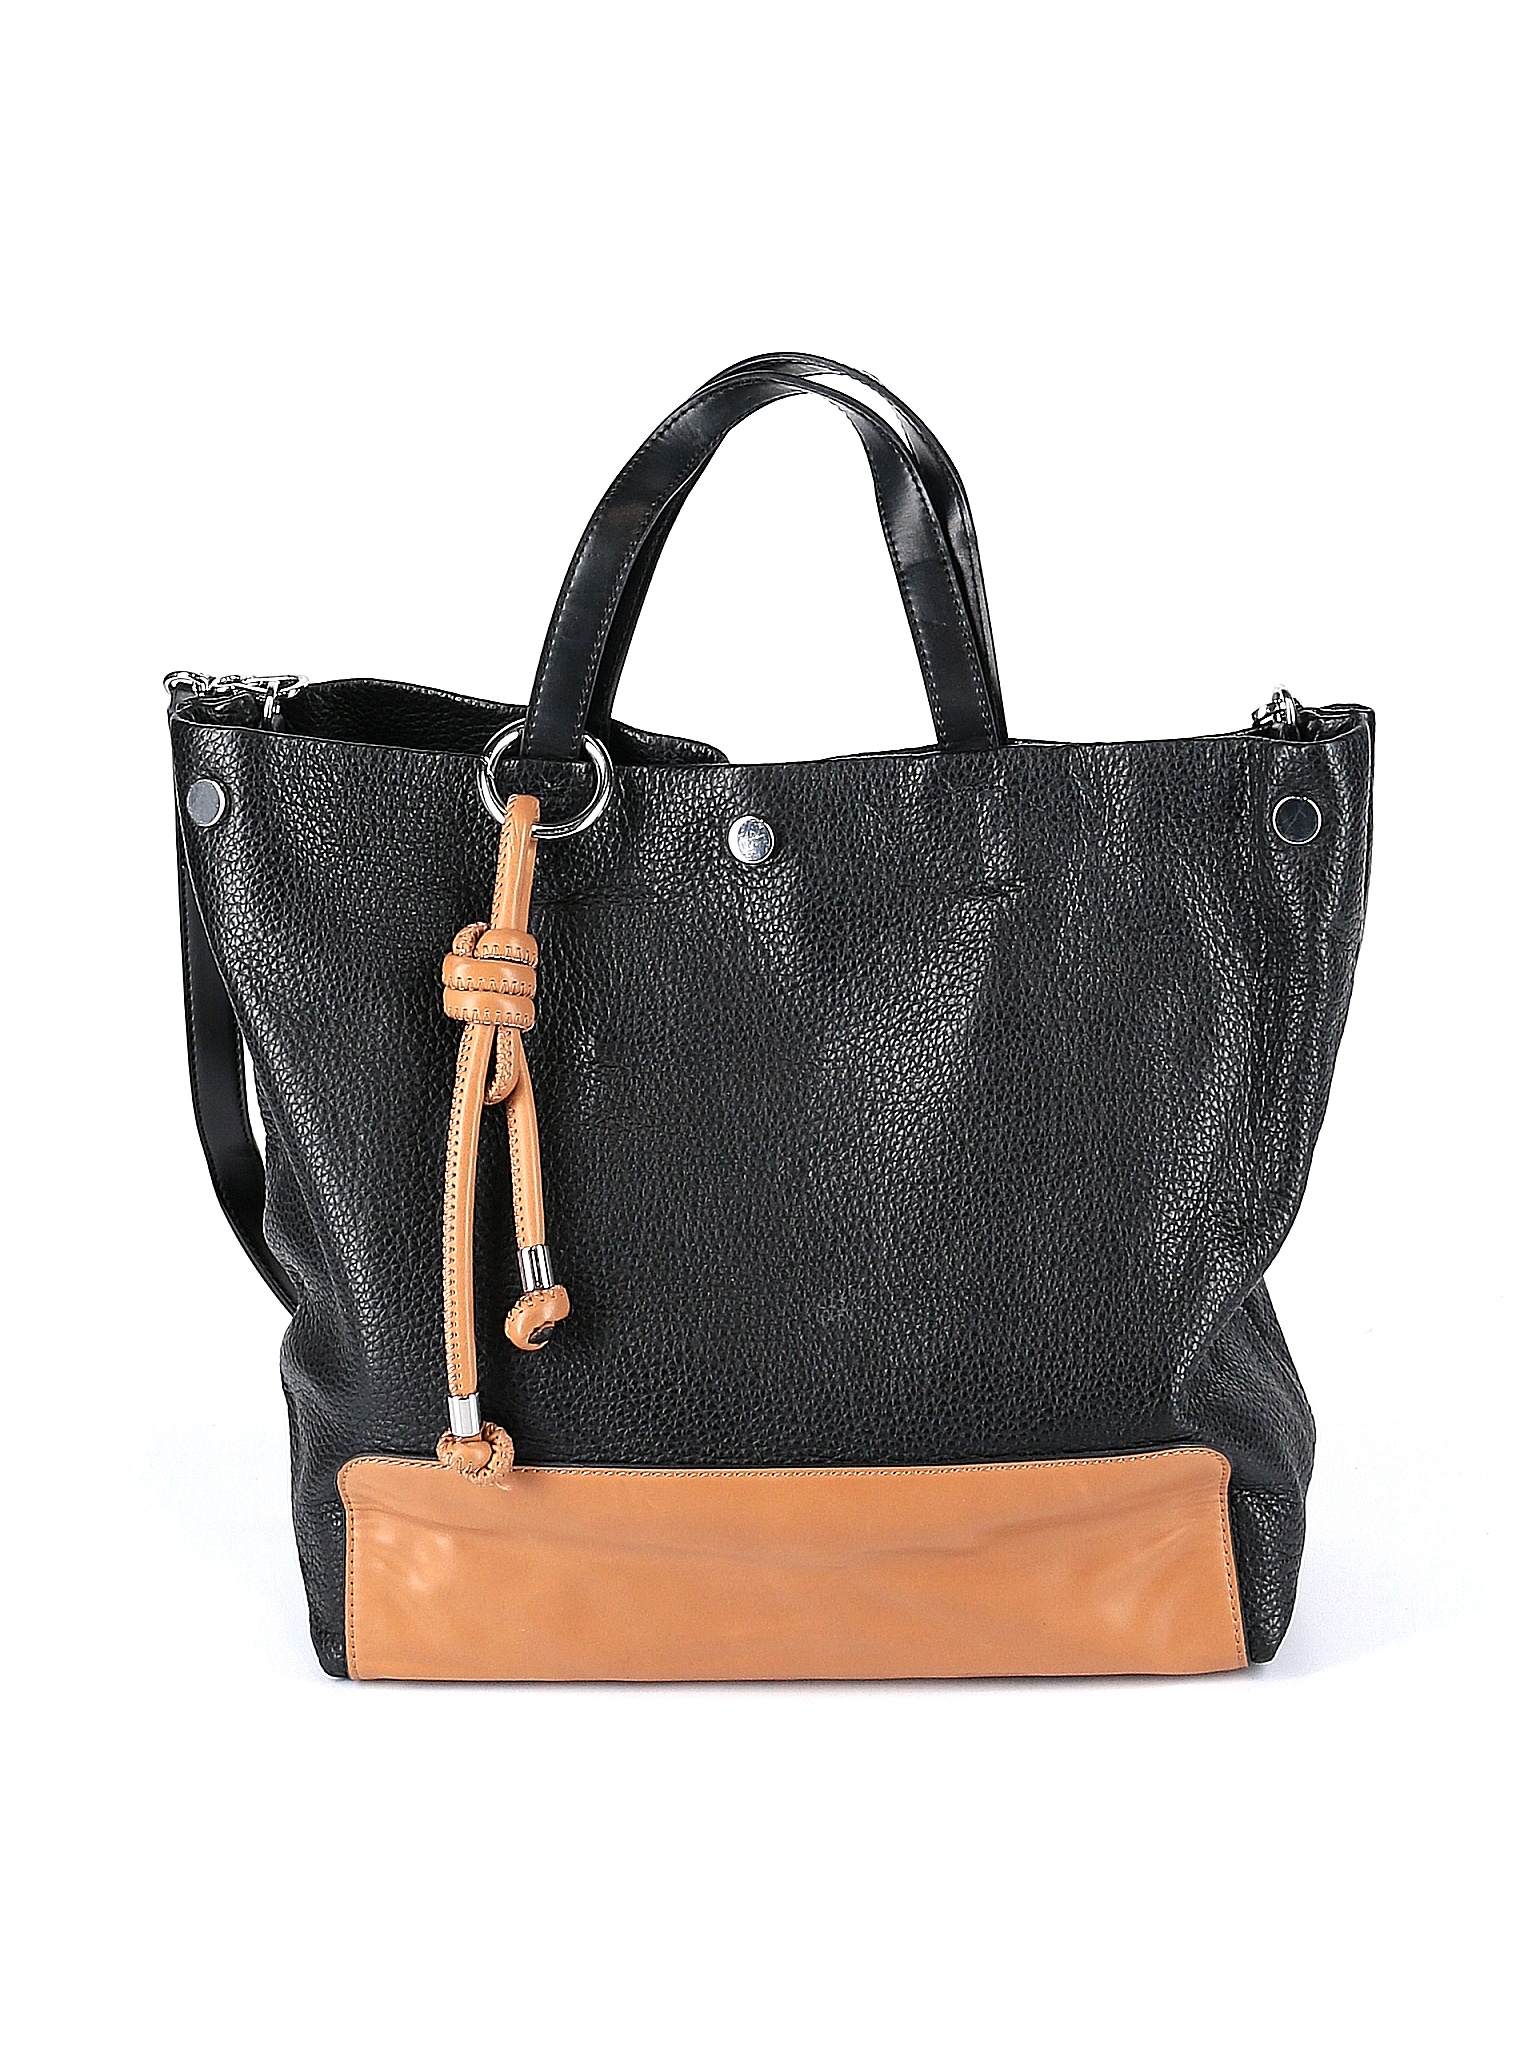 Vince Camuto Color Block Solid Black Leather Satchel One Size - 73% off ...